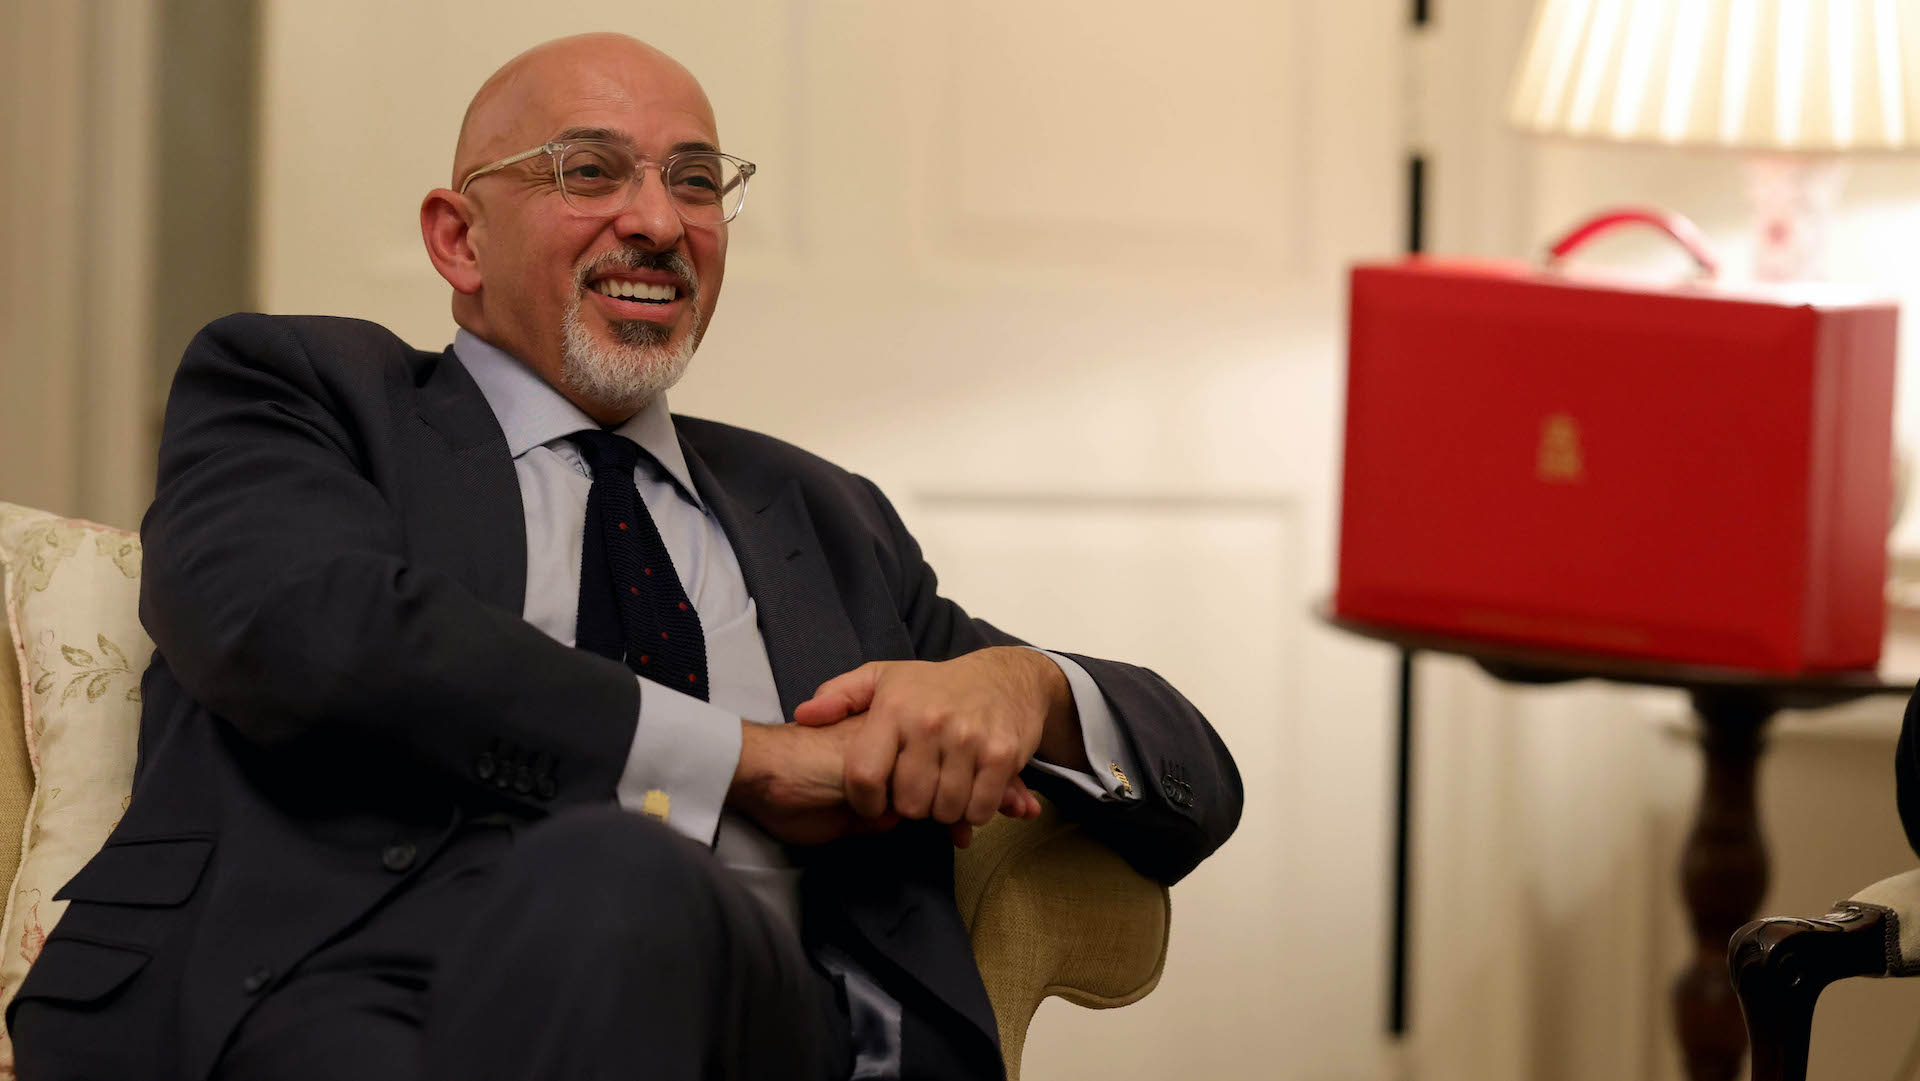 Nadhim Zahawi relaxes in a suit on a chair next to the chancellor's famous red dispatch box